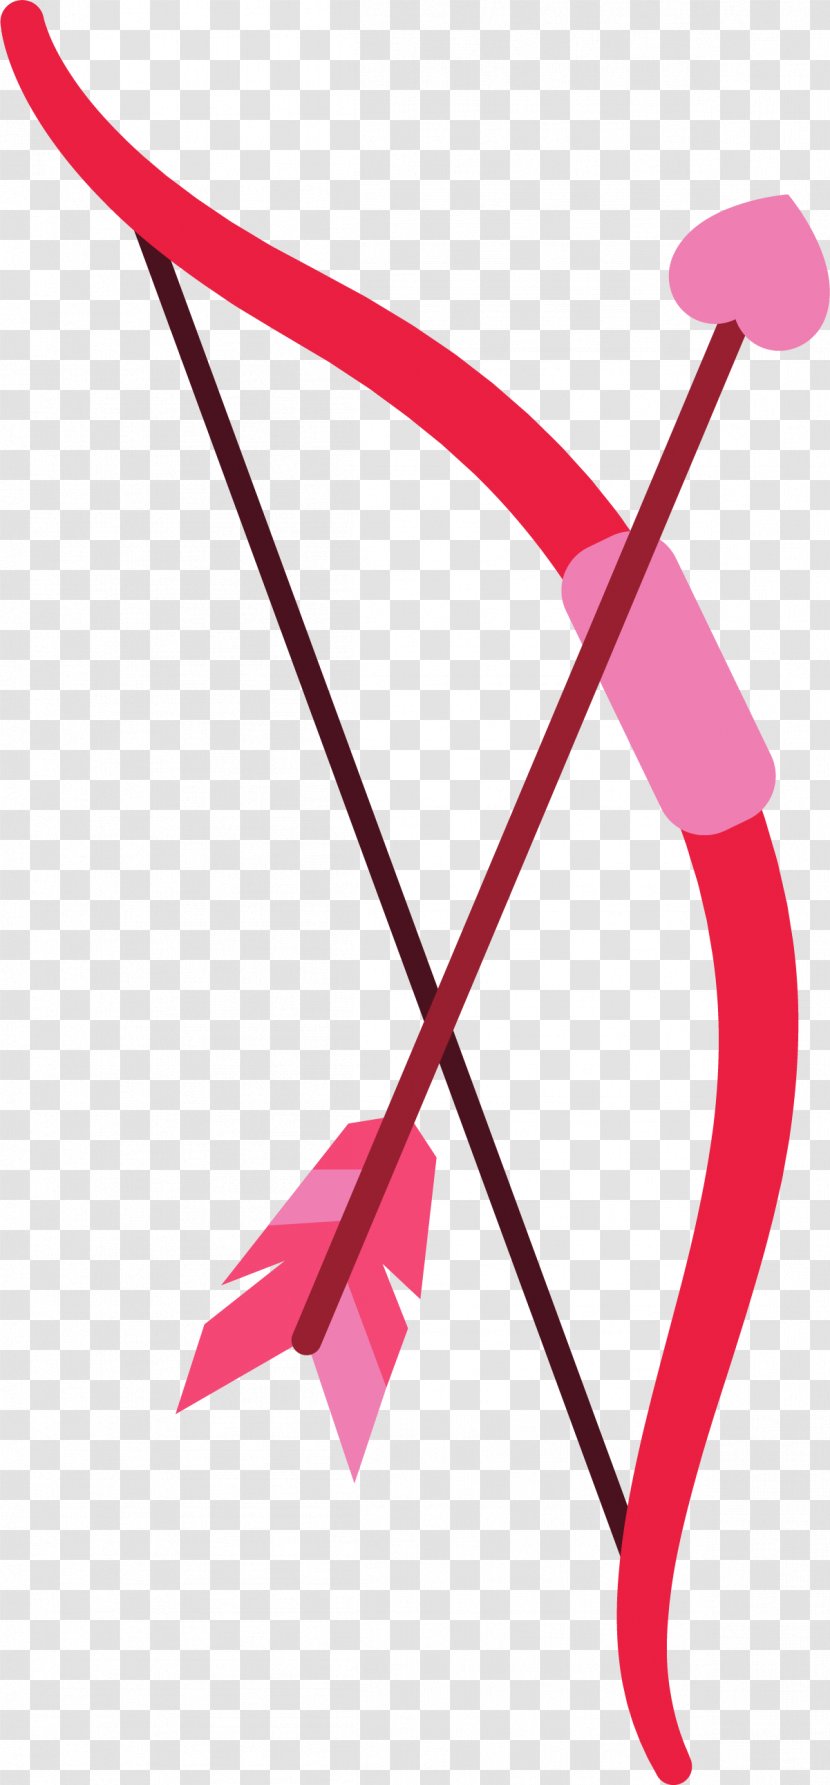 Bow And Arrow - Heart - Hand Painted Colorful Transparent PNG